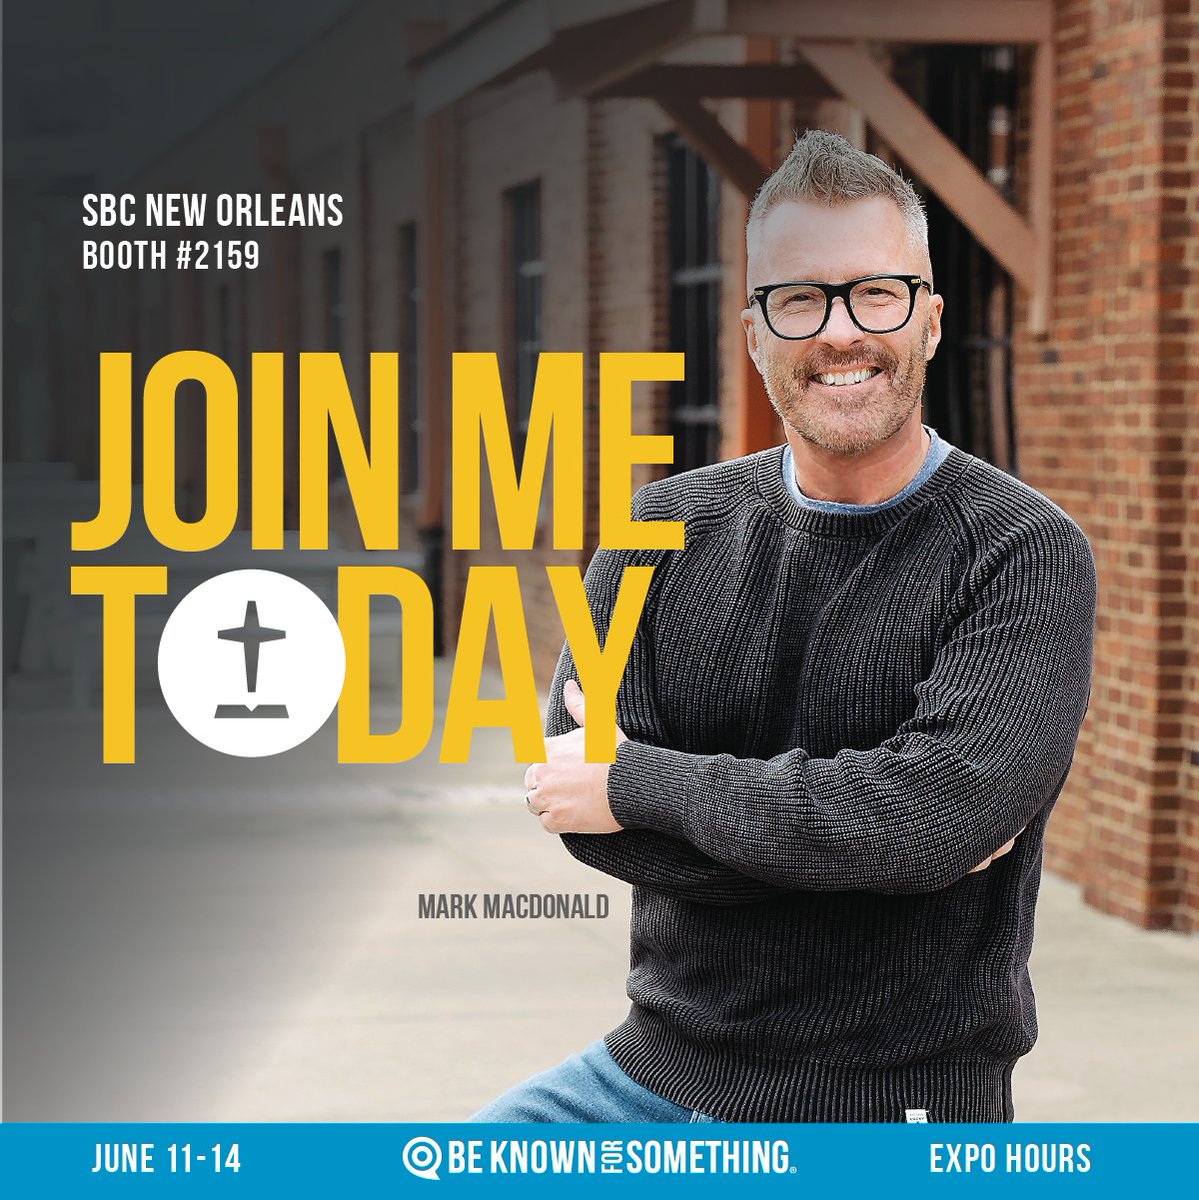 Join me at the SBC Annual Meeting, Booth #2159. Author of the bestselling Church Branding book. Ask me anything! #Branding, #websites, #socialmedia, #SEO 
June 11-14, Expo Hours
#beknownforsomething #discoveryourthread #churchcomms #branding #pastor #annualmeeting #sbc23